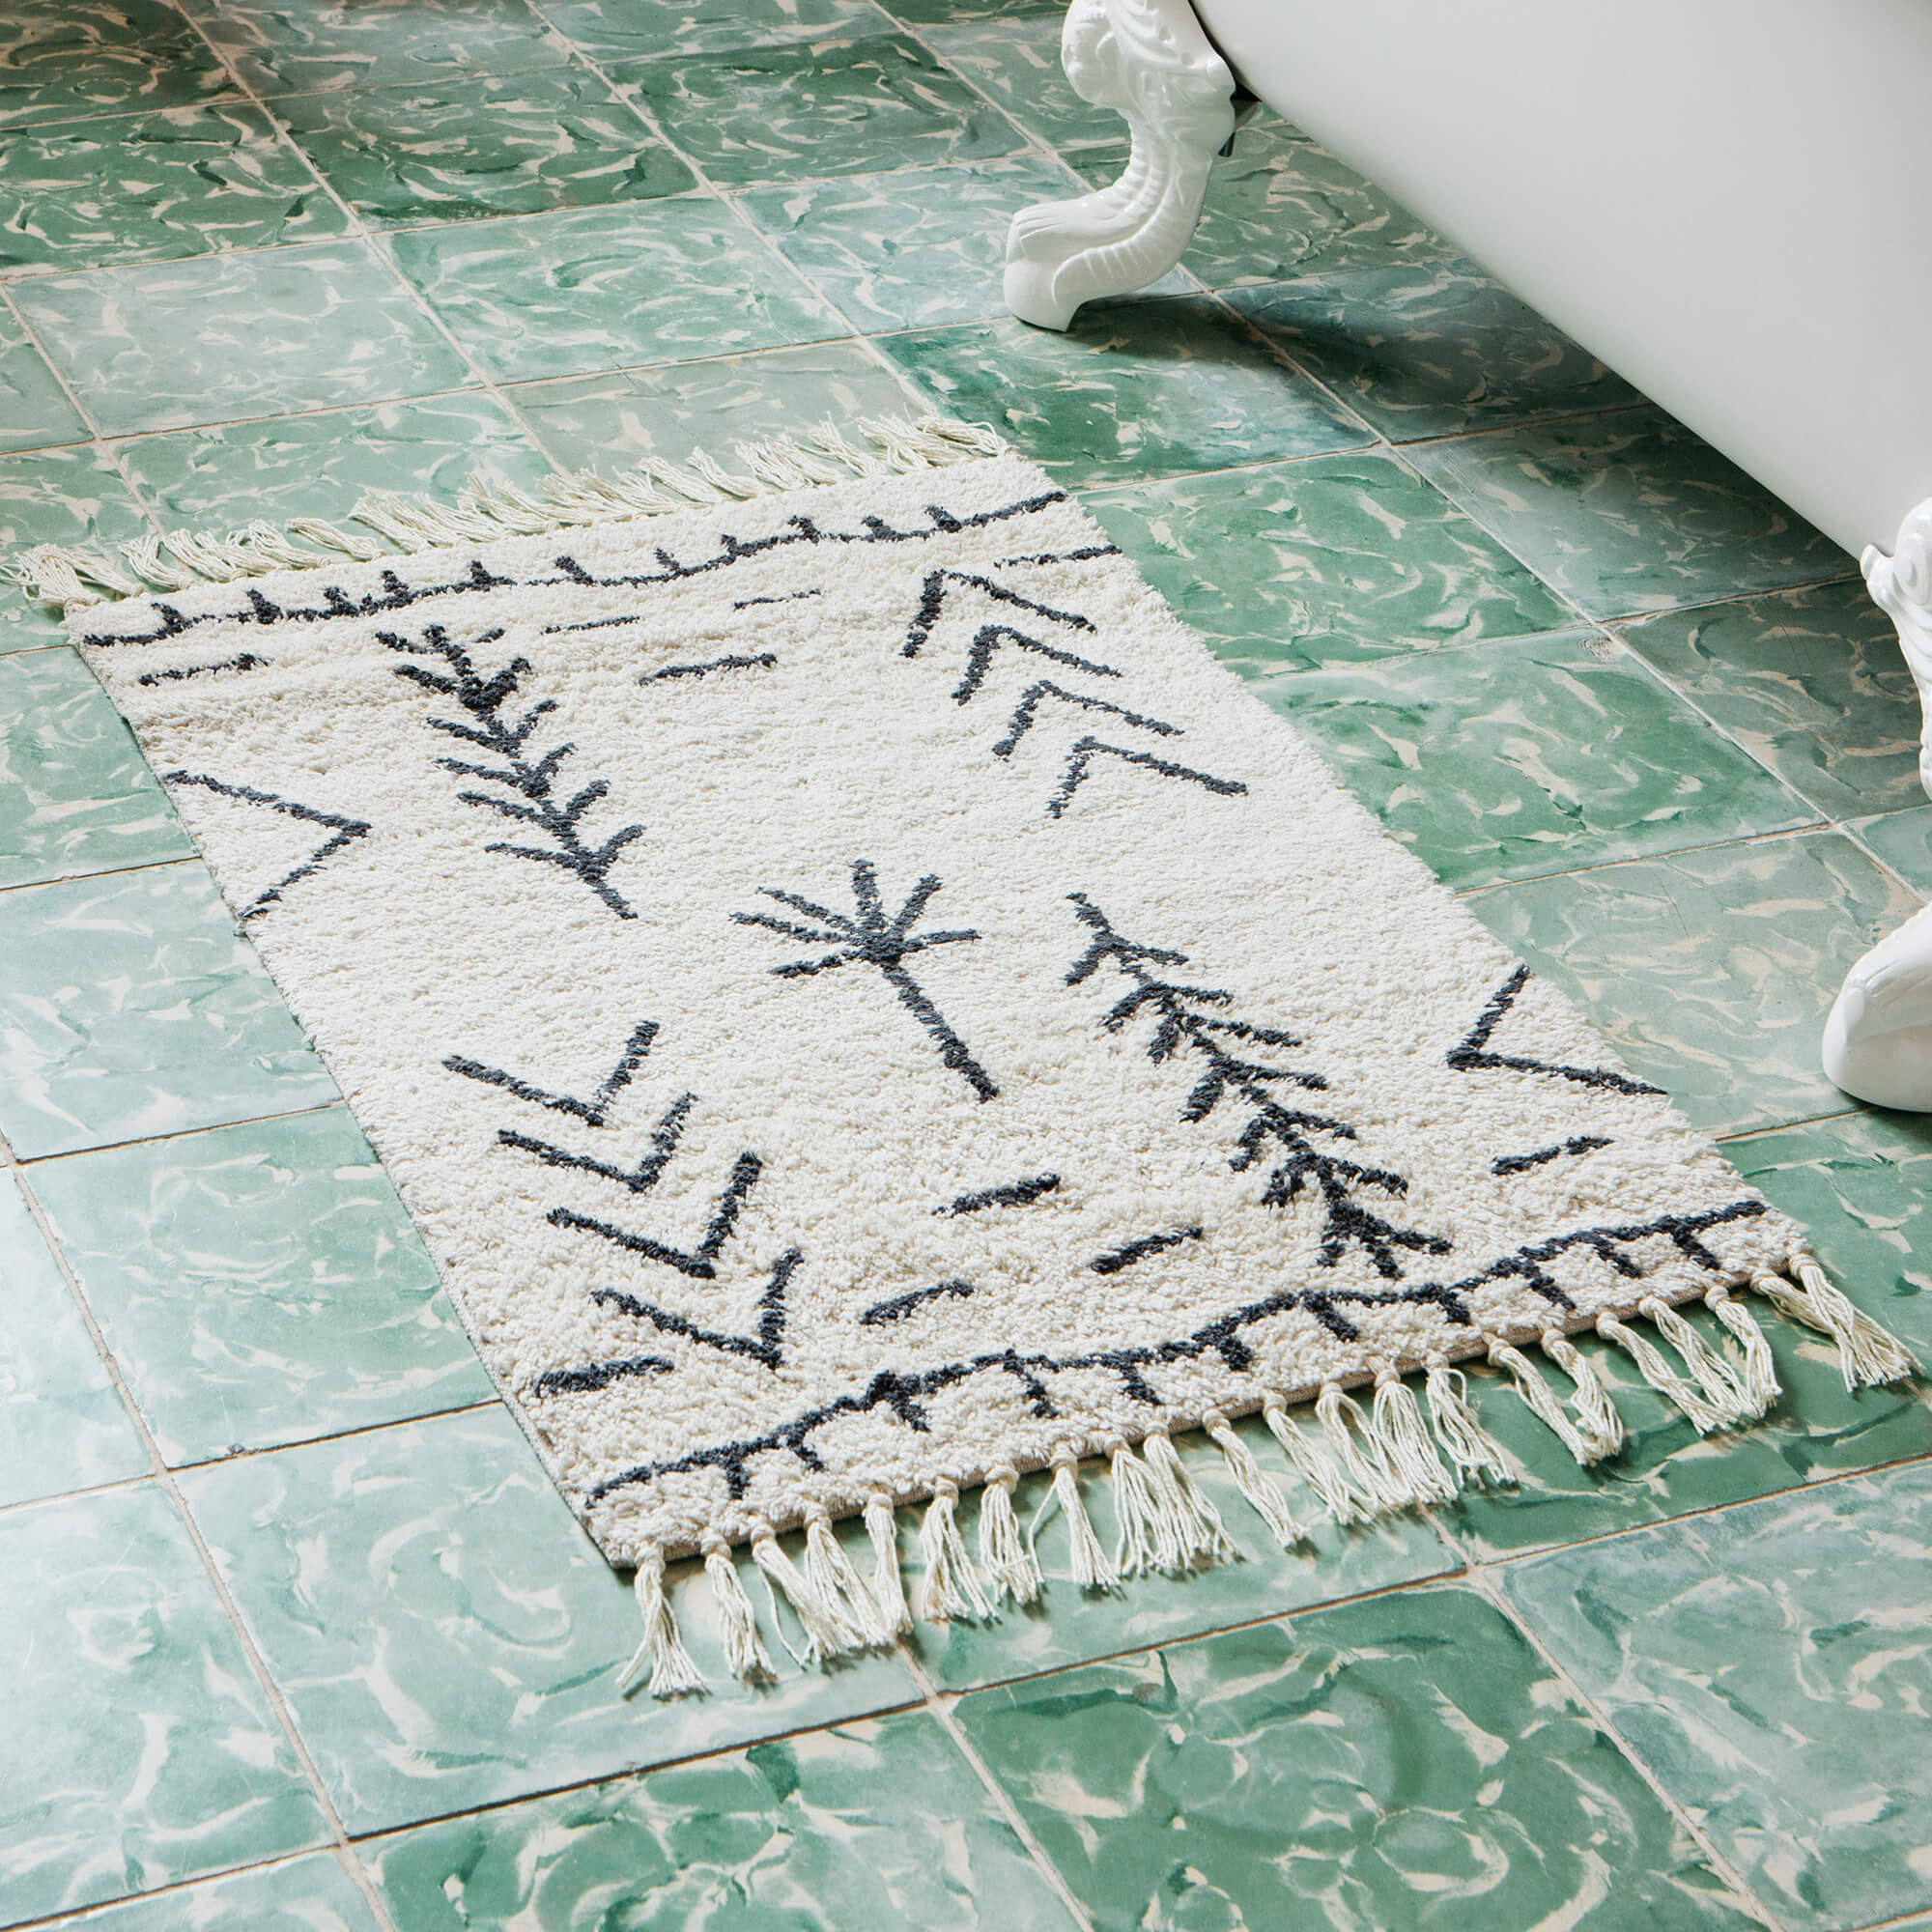 Read more about Graham and green black patterned bath mat